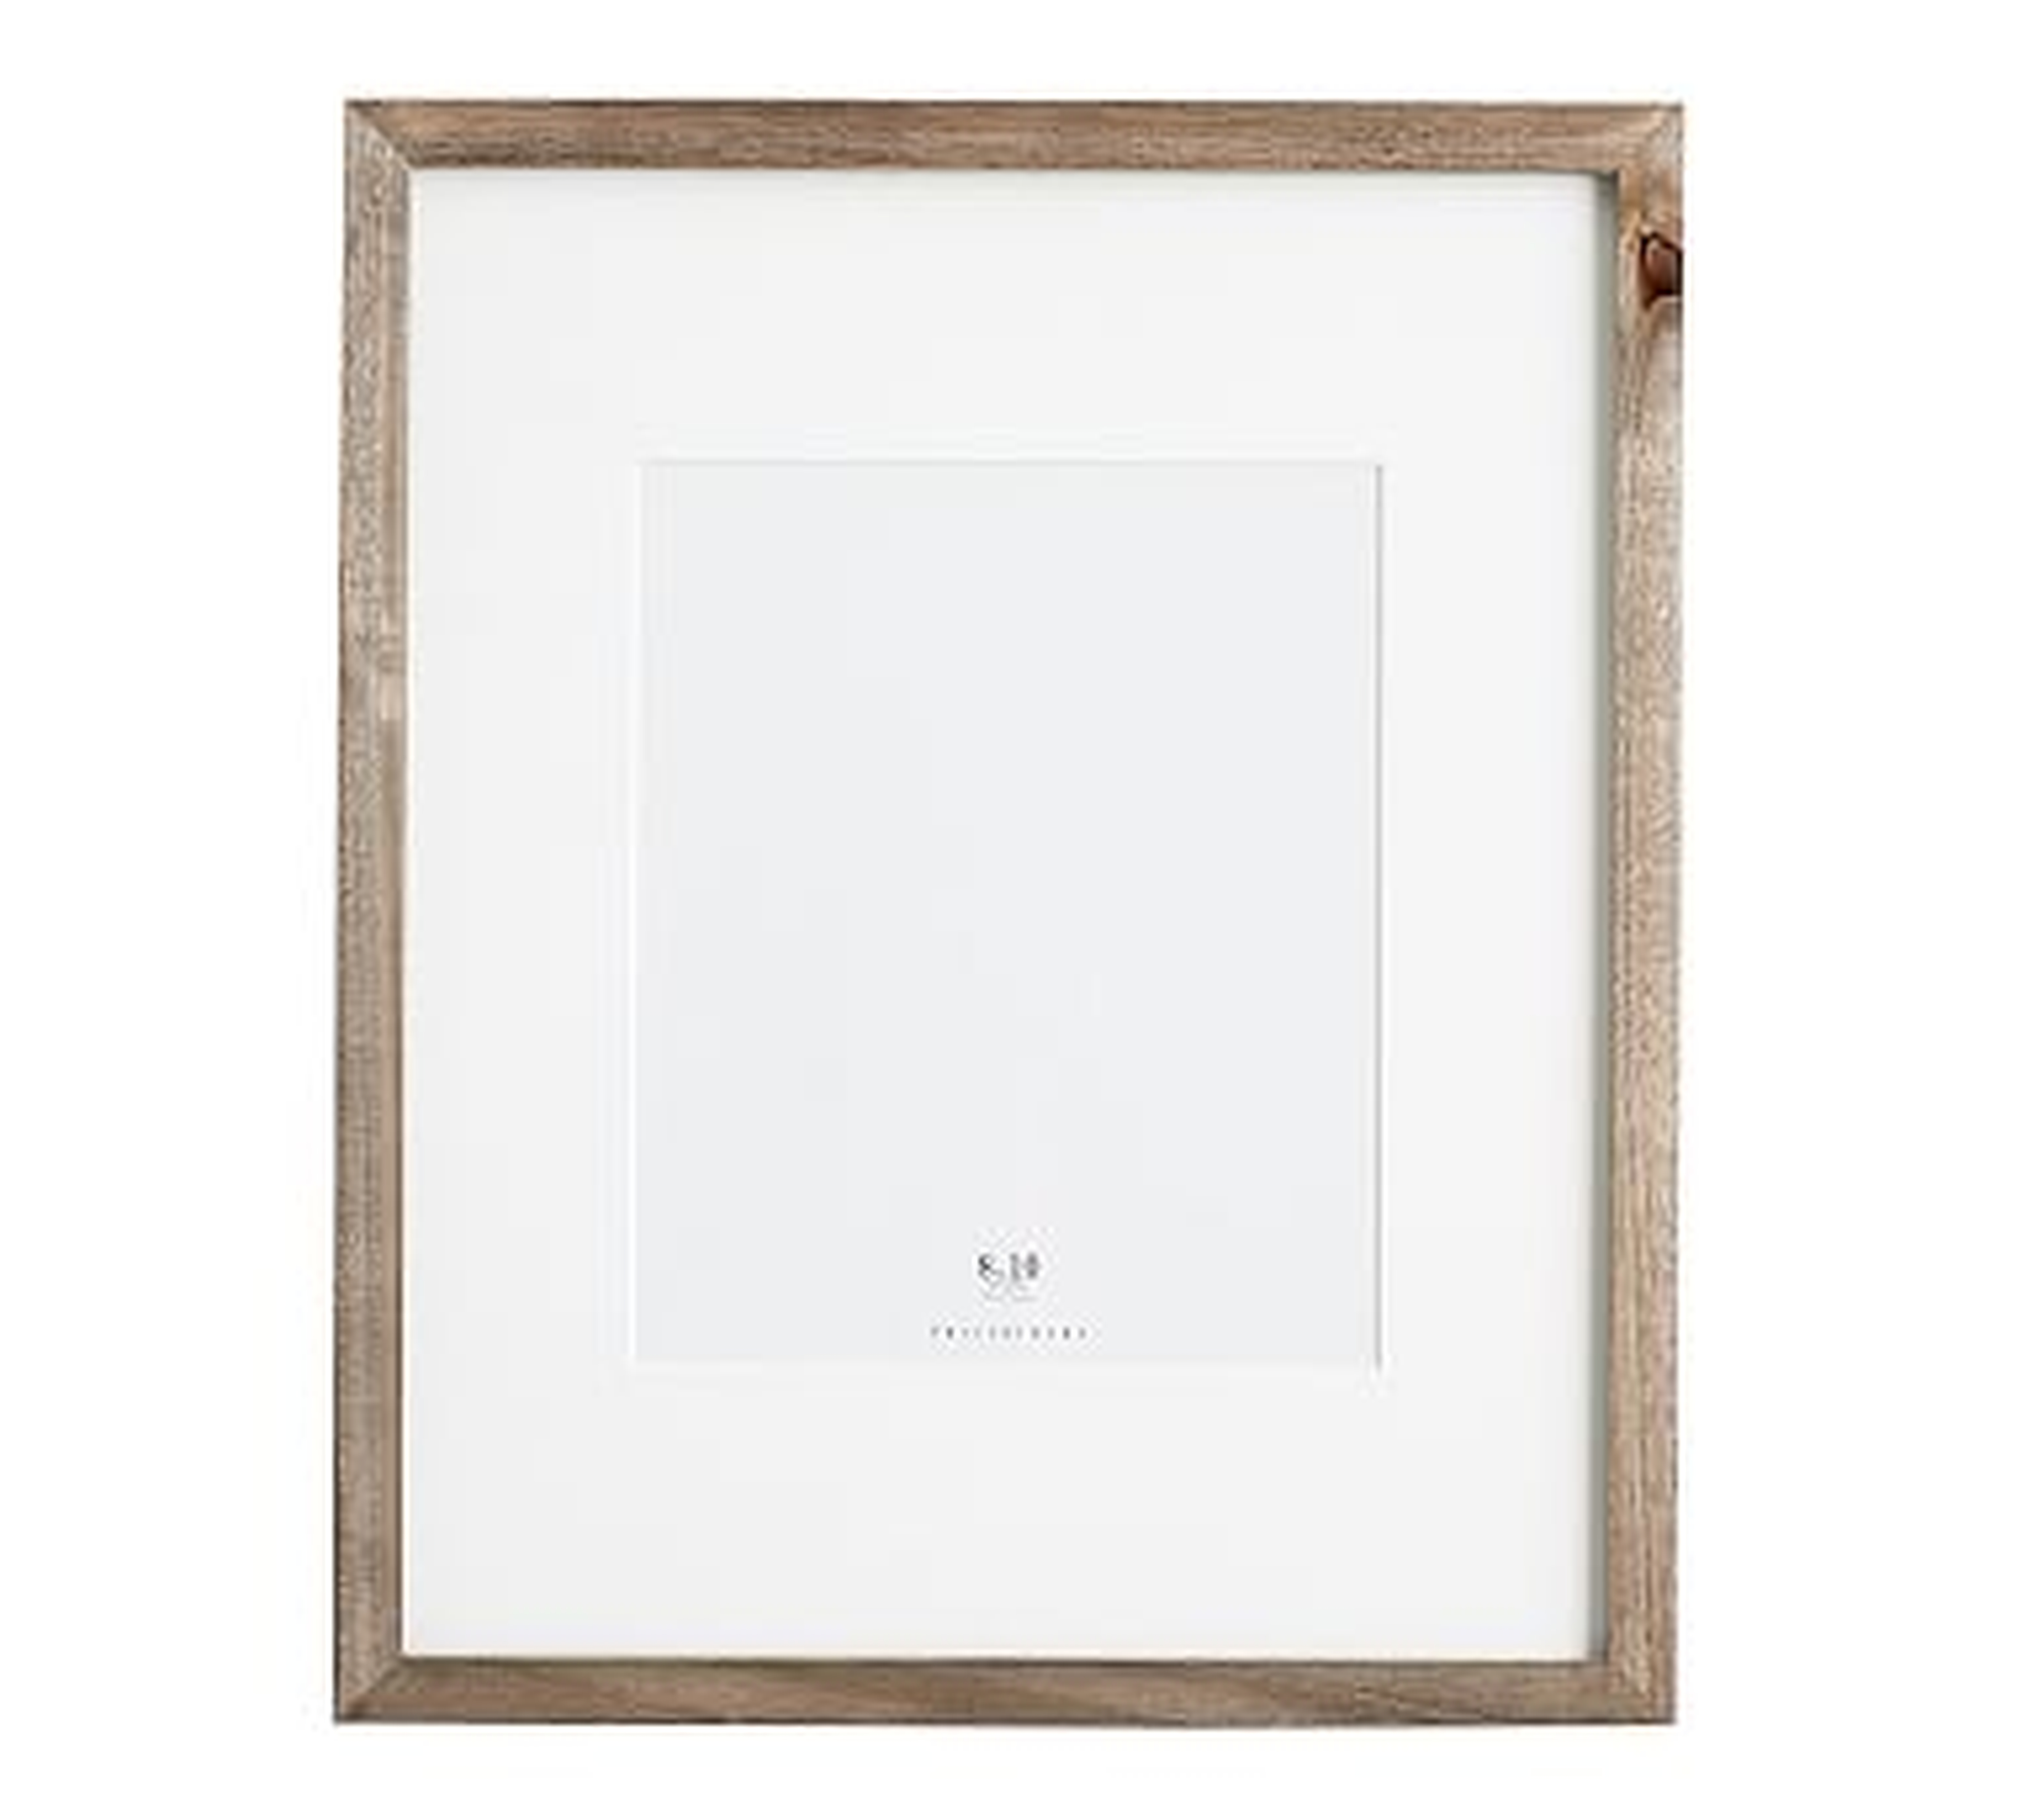 Wood Gallery Single Opening Frame, 8x10, Gray - Pottery Barn